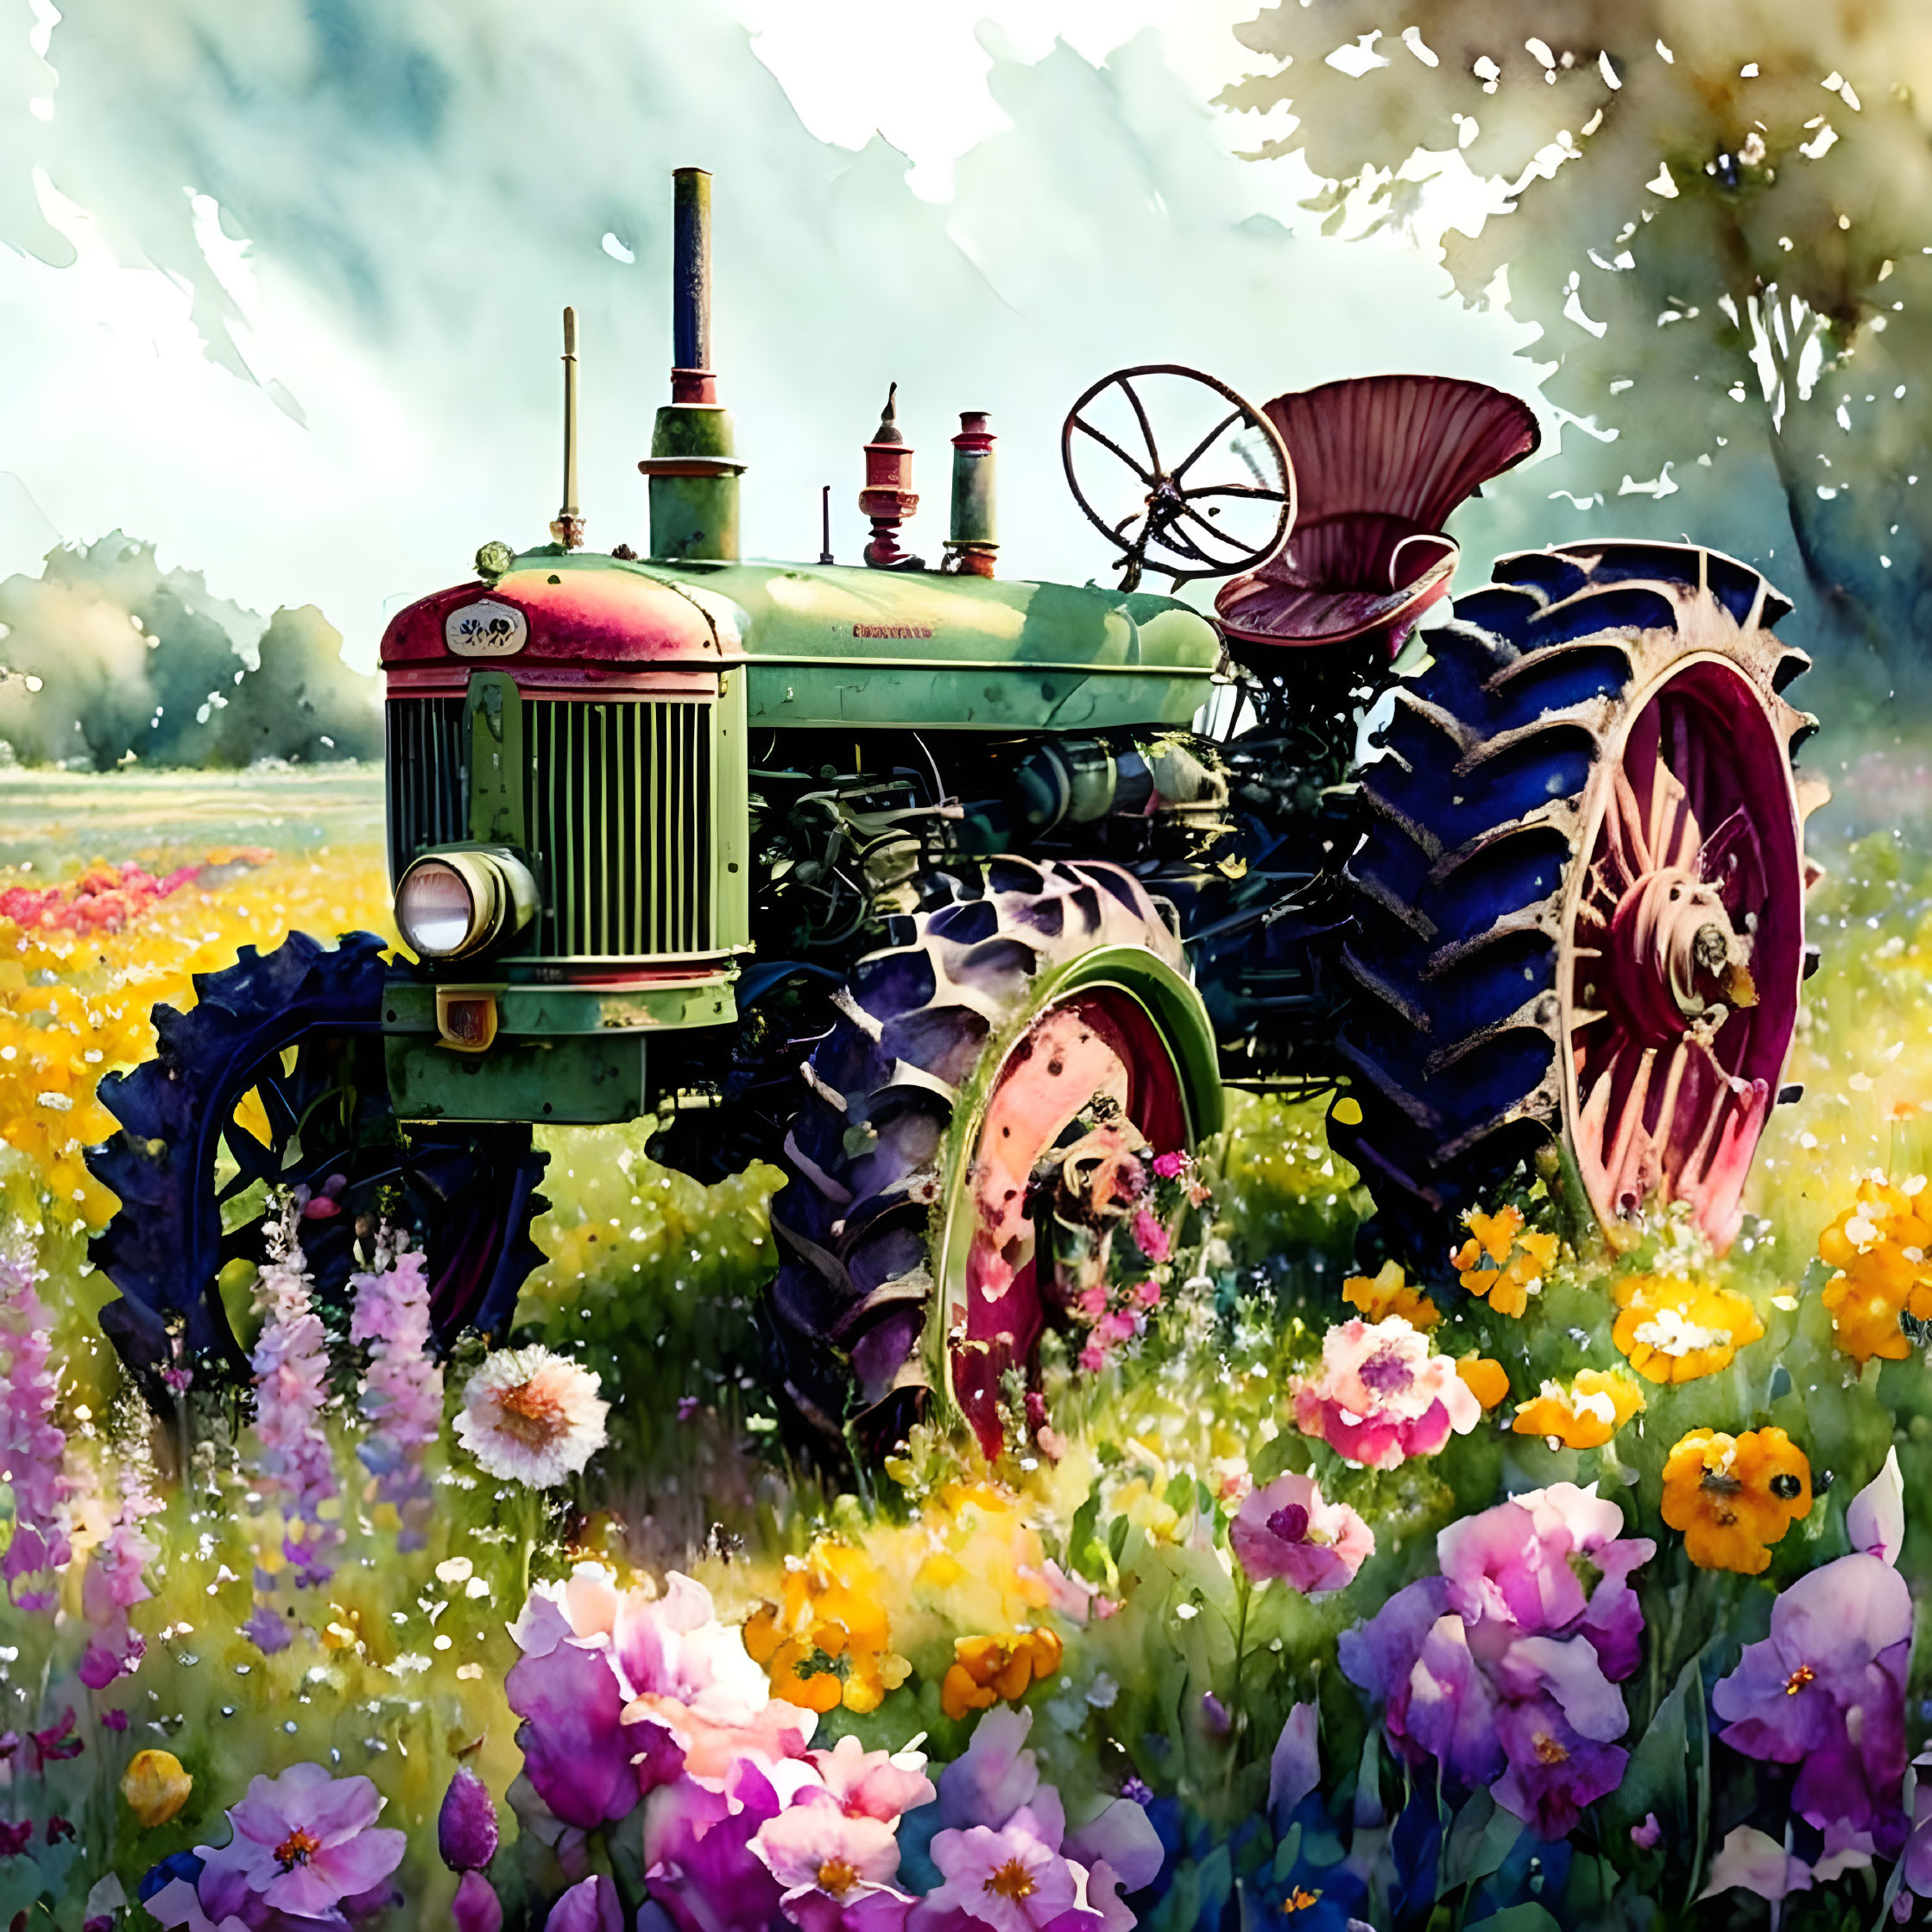 Vintage green tractor in colorful flower field under sunny sky